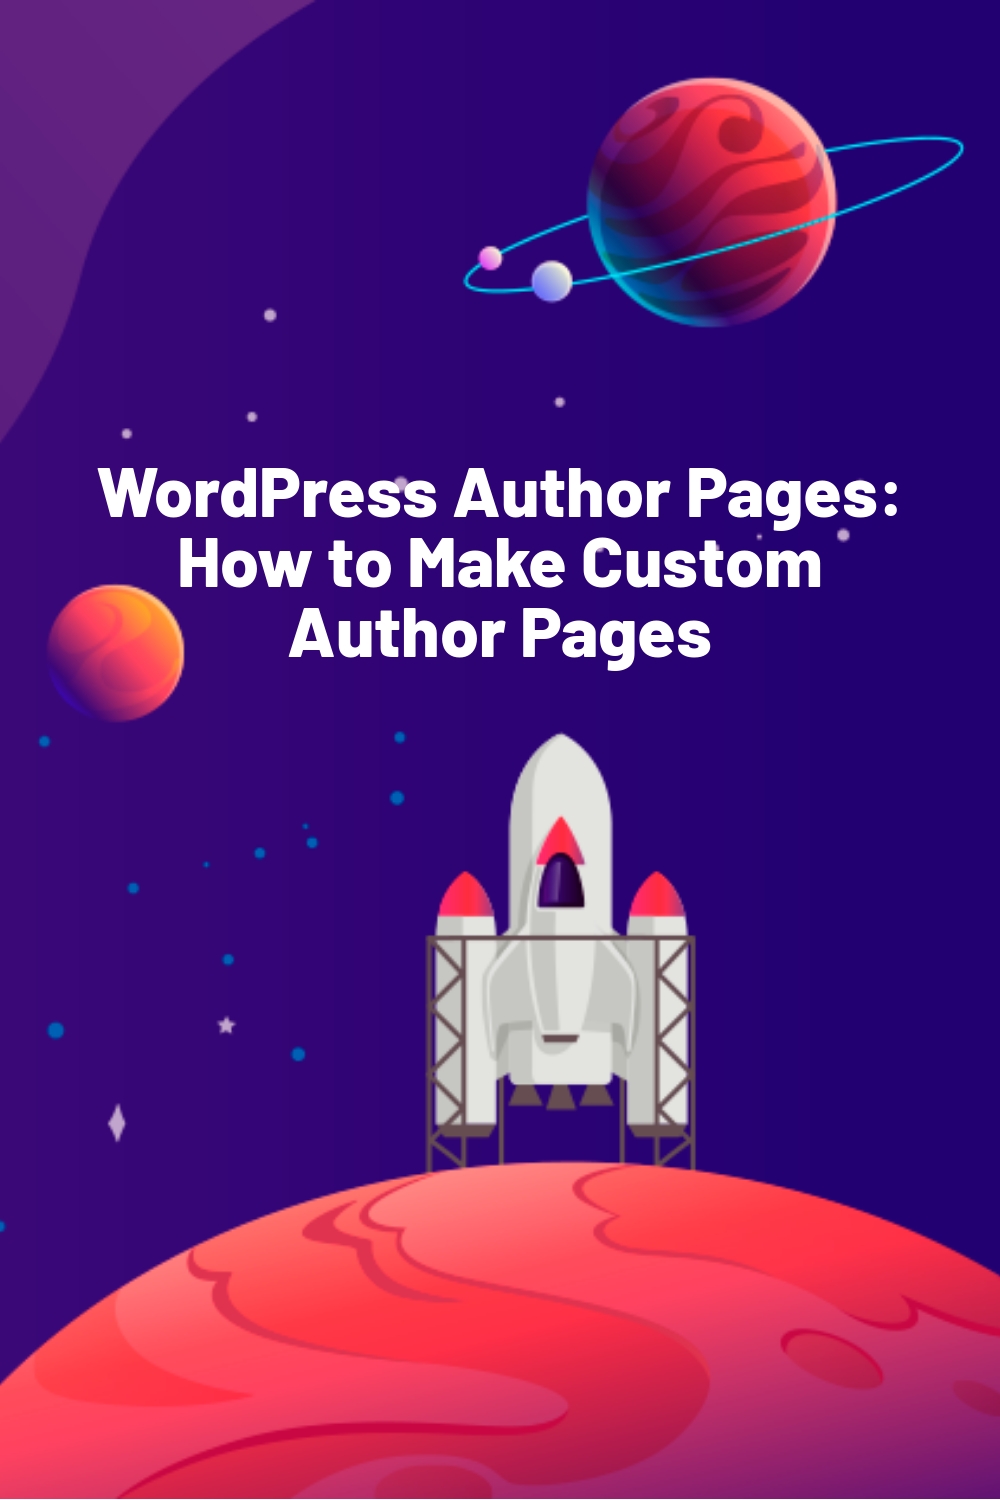 WordPress Author Pages: How to Make Custom Author Pages